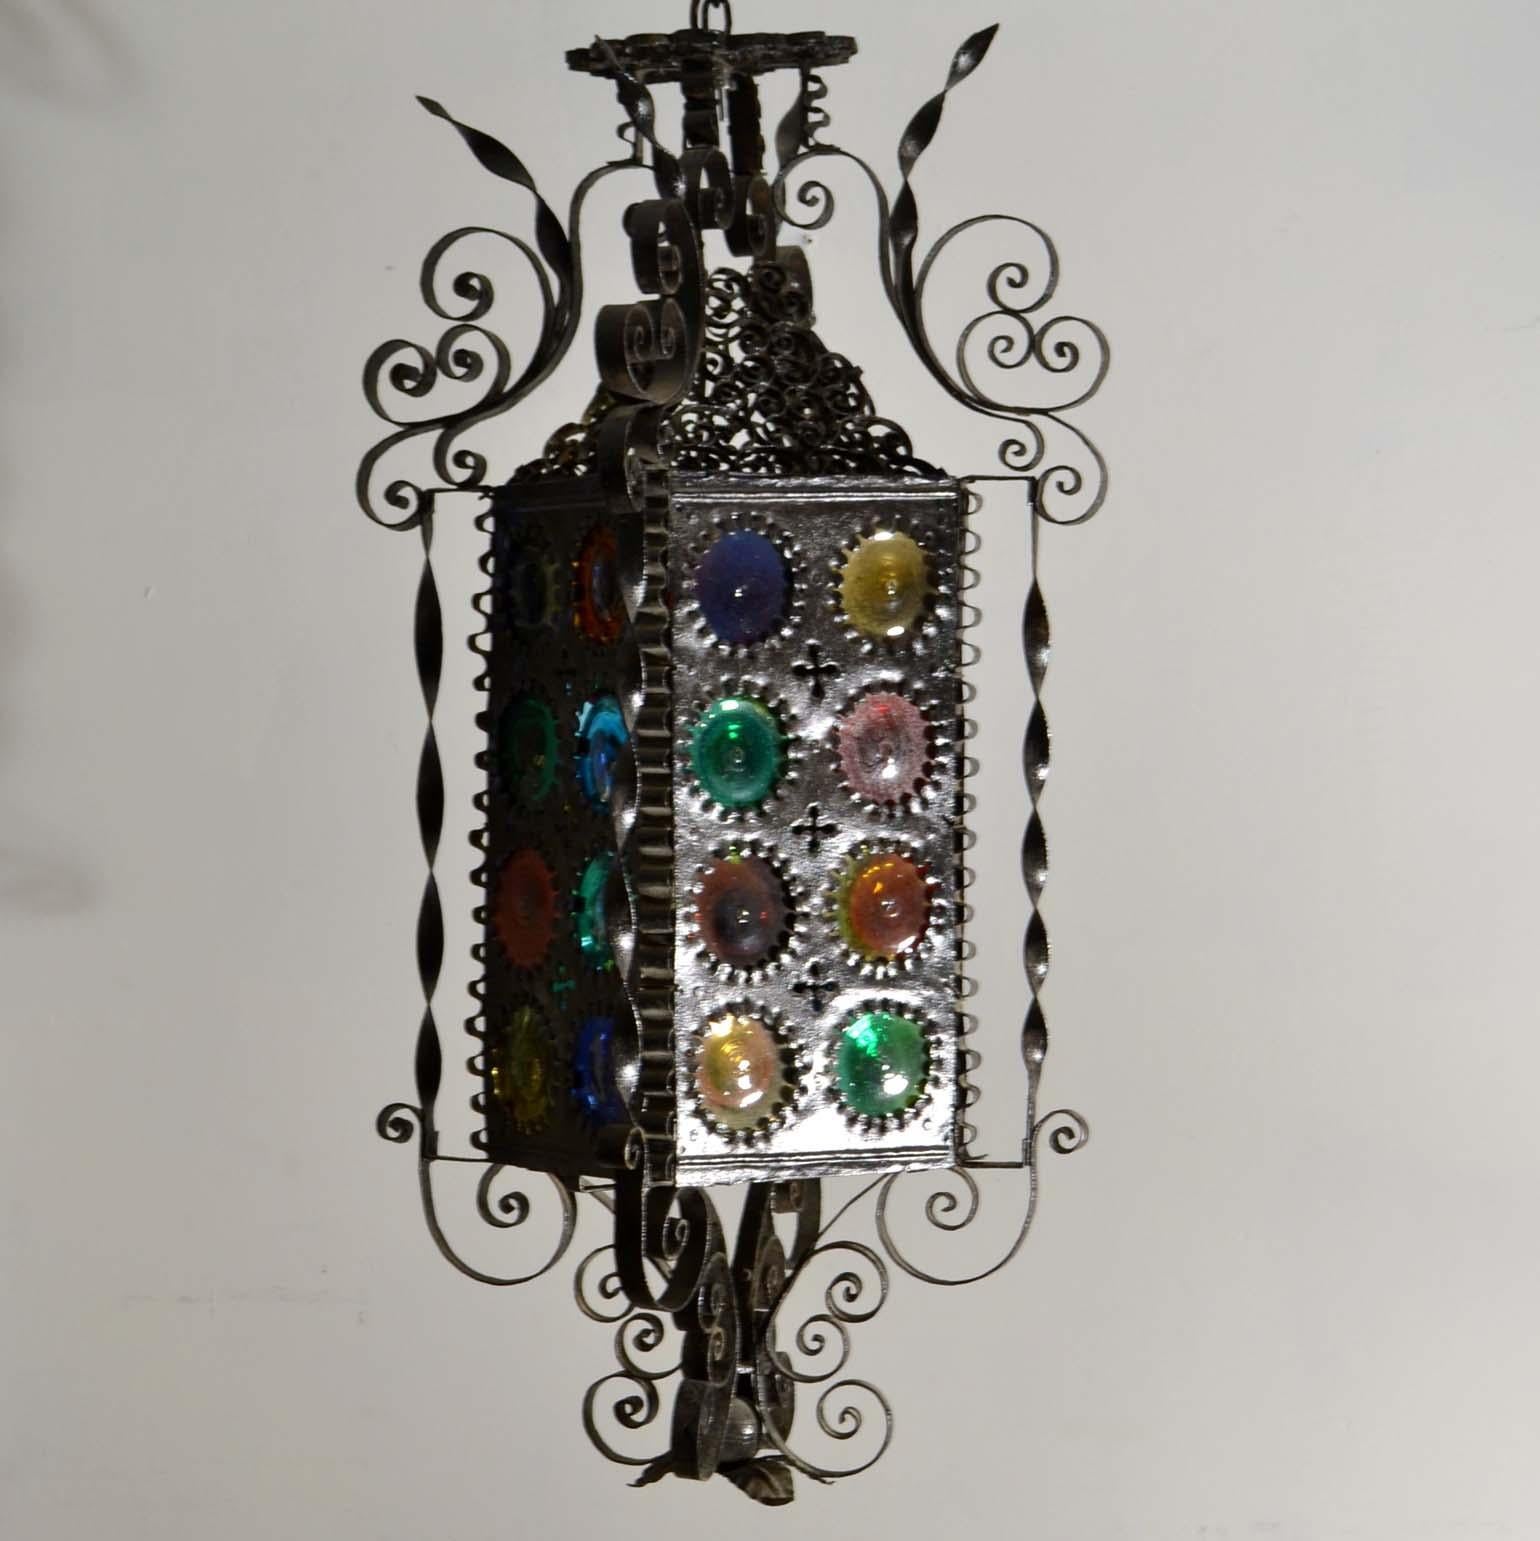 Italian 20th Century Venetian Wrought Iron Lantern with Colored Glass Disks